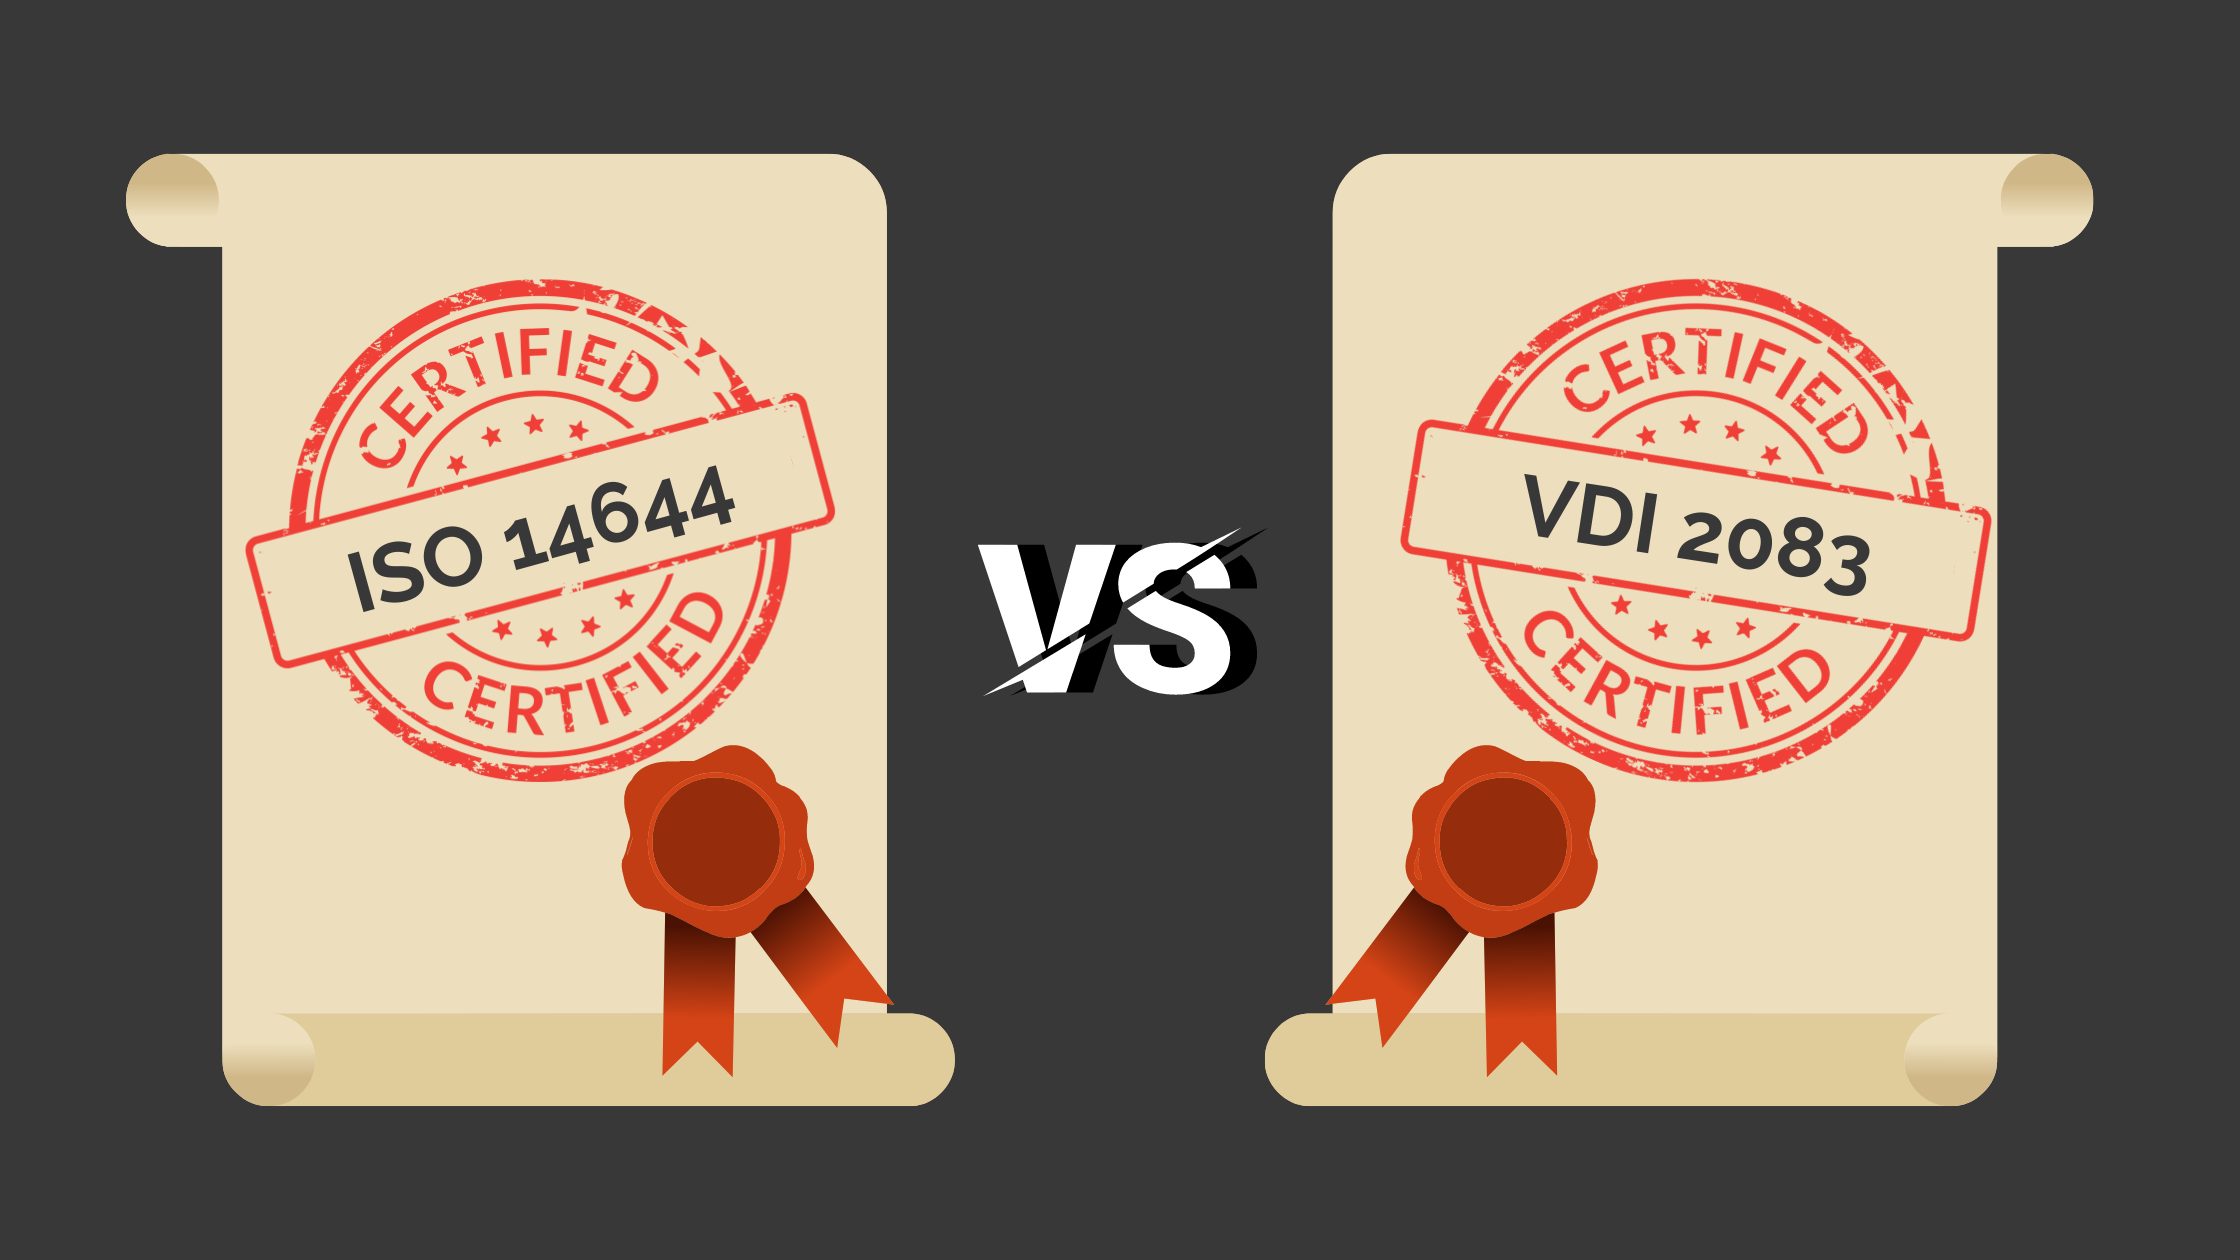 Difference Between ISO 14644 and VDI 2083